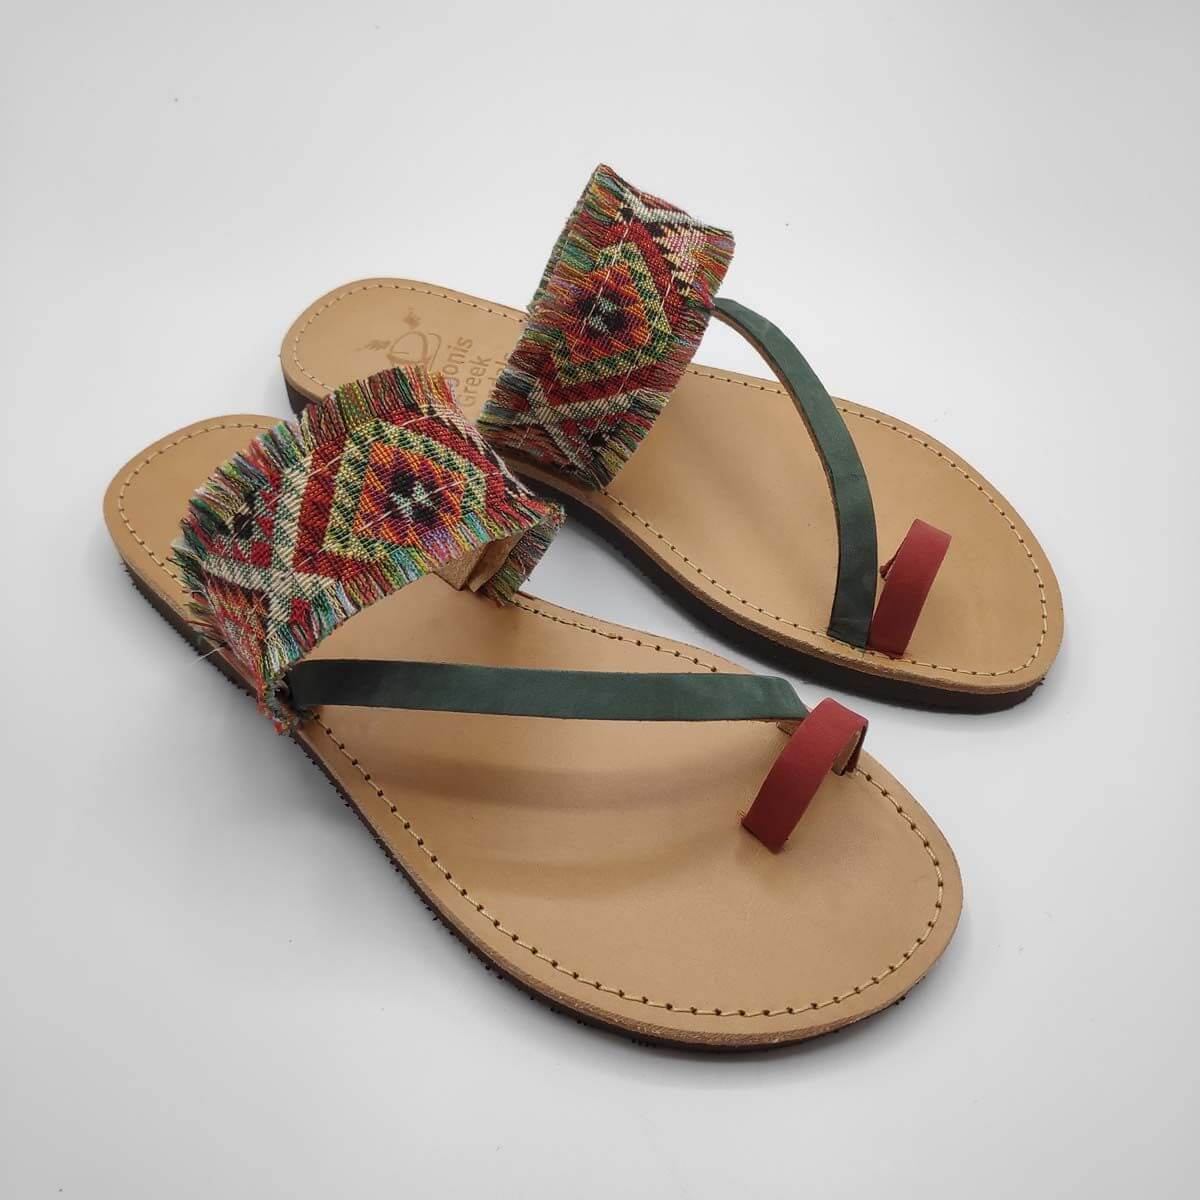 Pink & Blue Fabric & Leather Boho Sandals with Fringes | Comi Boho | Pagonis Greek Sandals